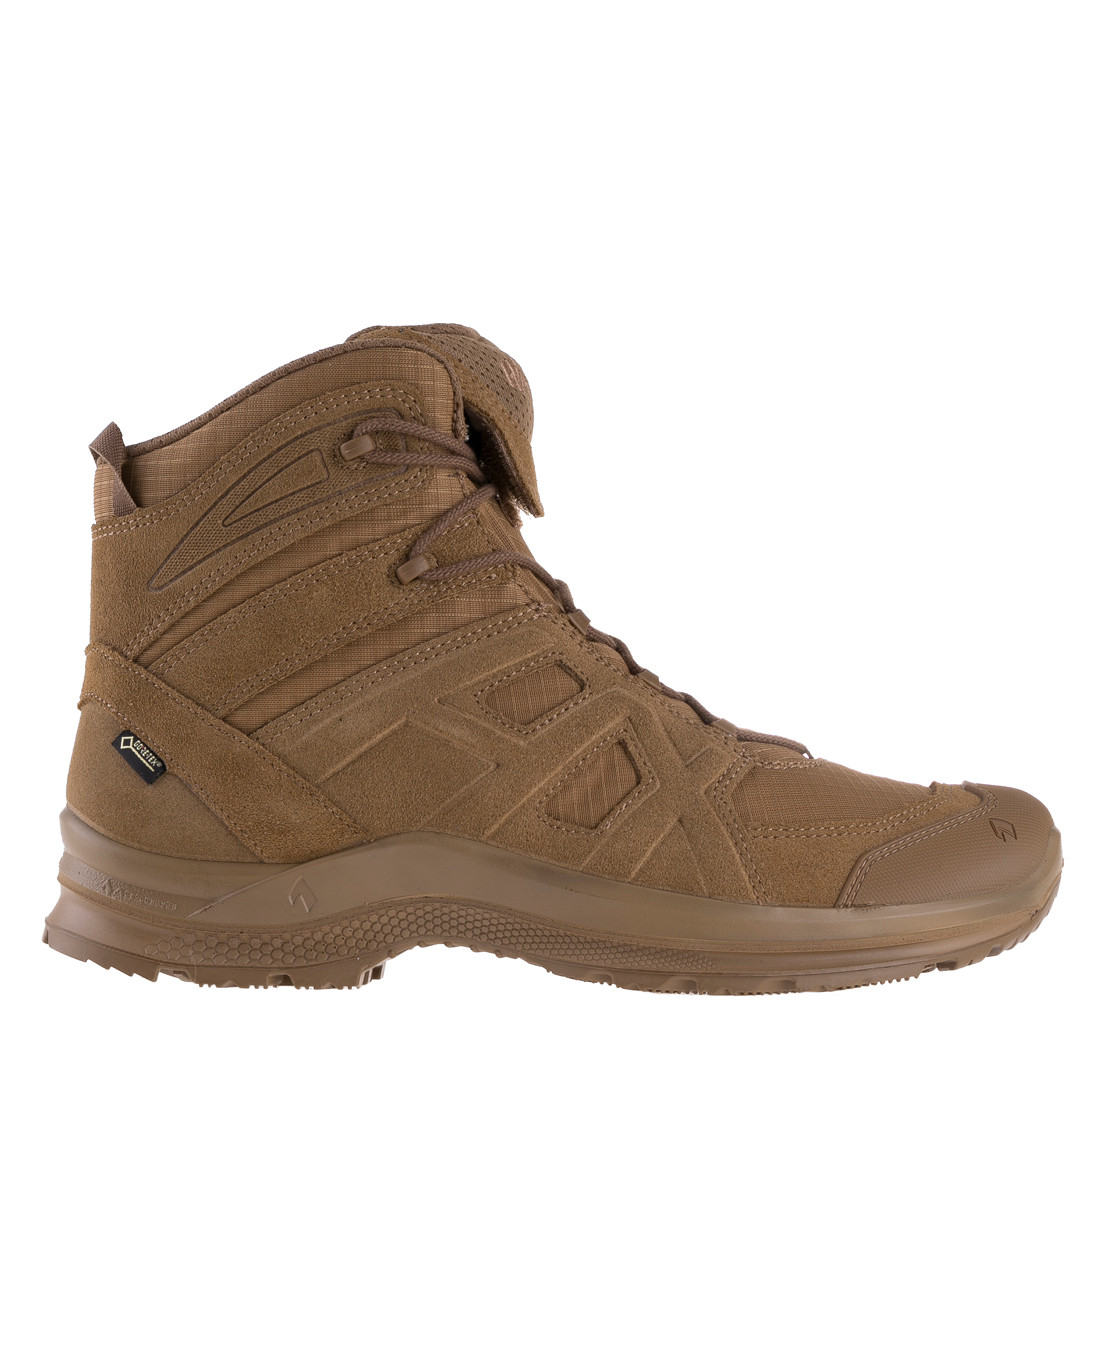 Haix Black Eagle Athletic 2.0 V Gore-Tex Mid Coyote Desert Army Military Boots